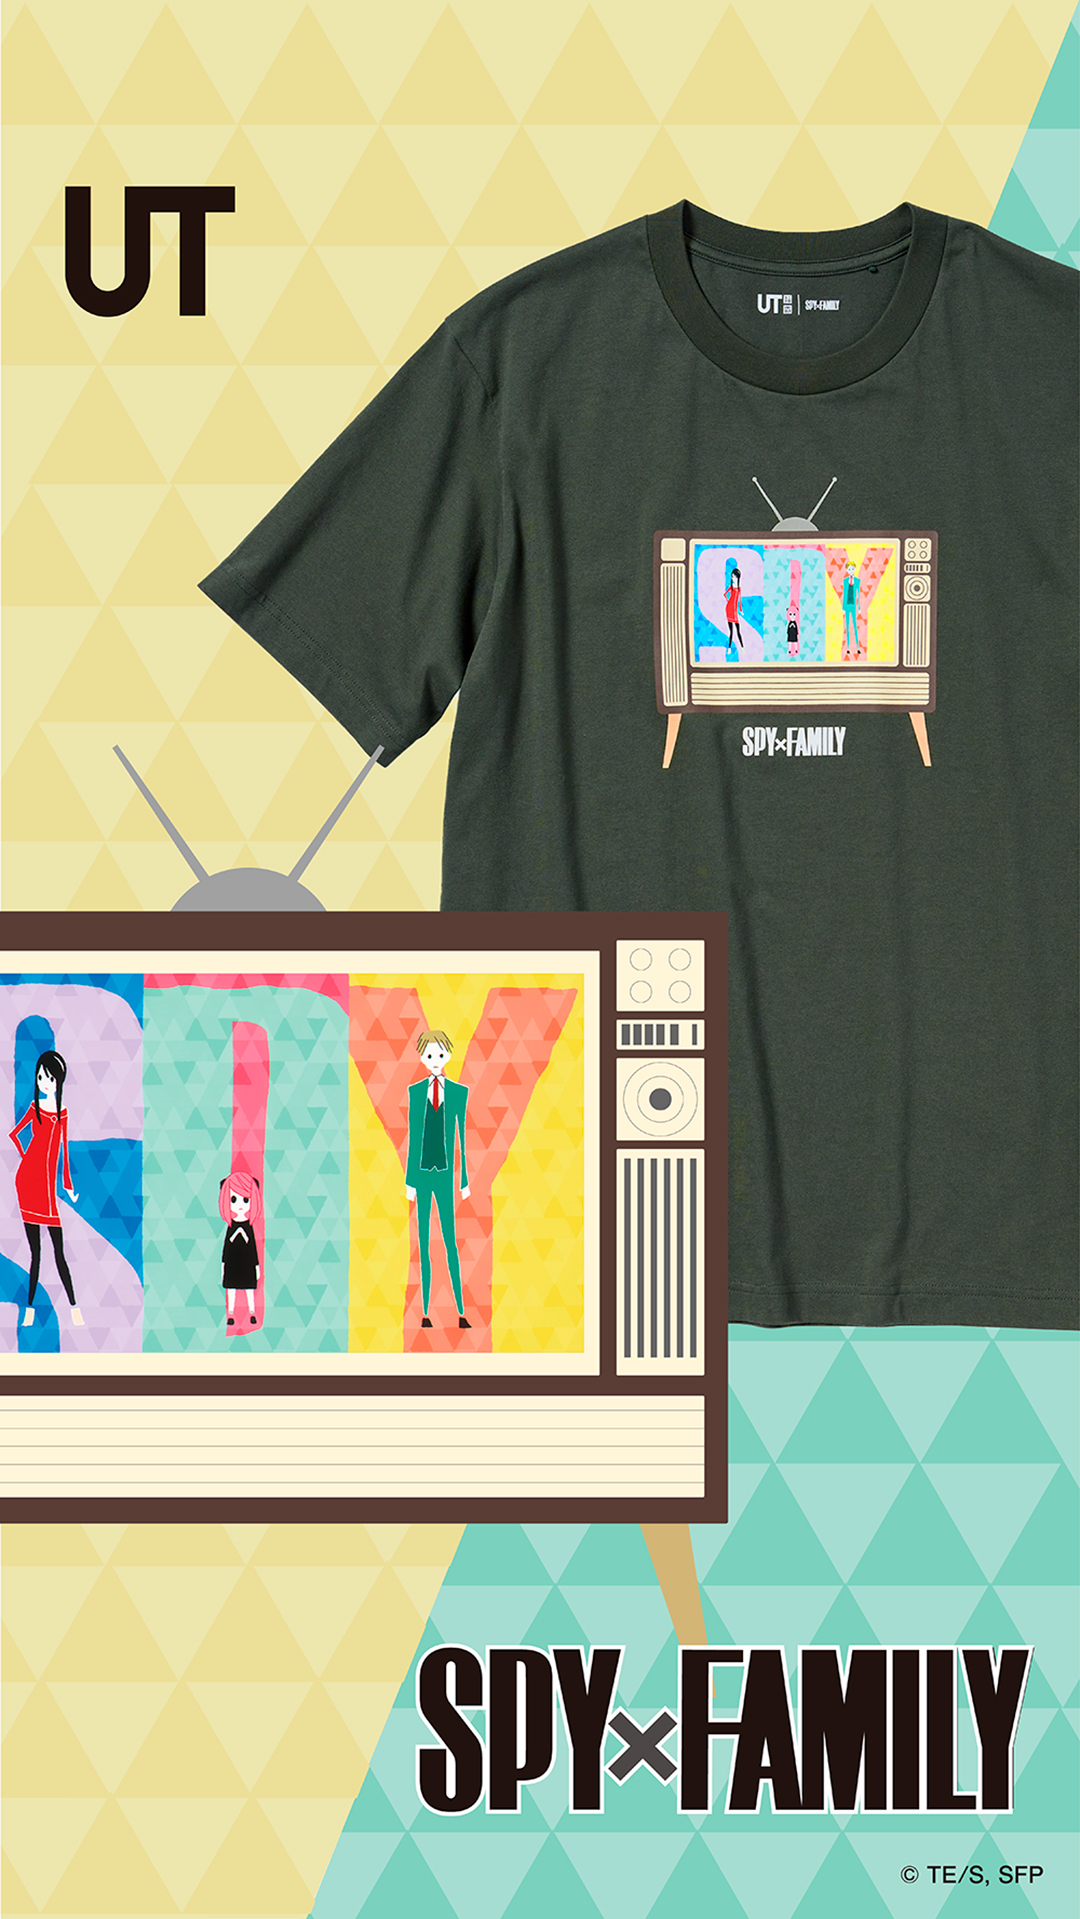 Spy x Family T-shirts from Uniqlo let you make your love of the